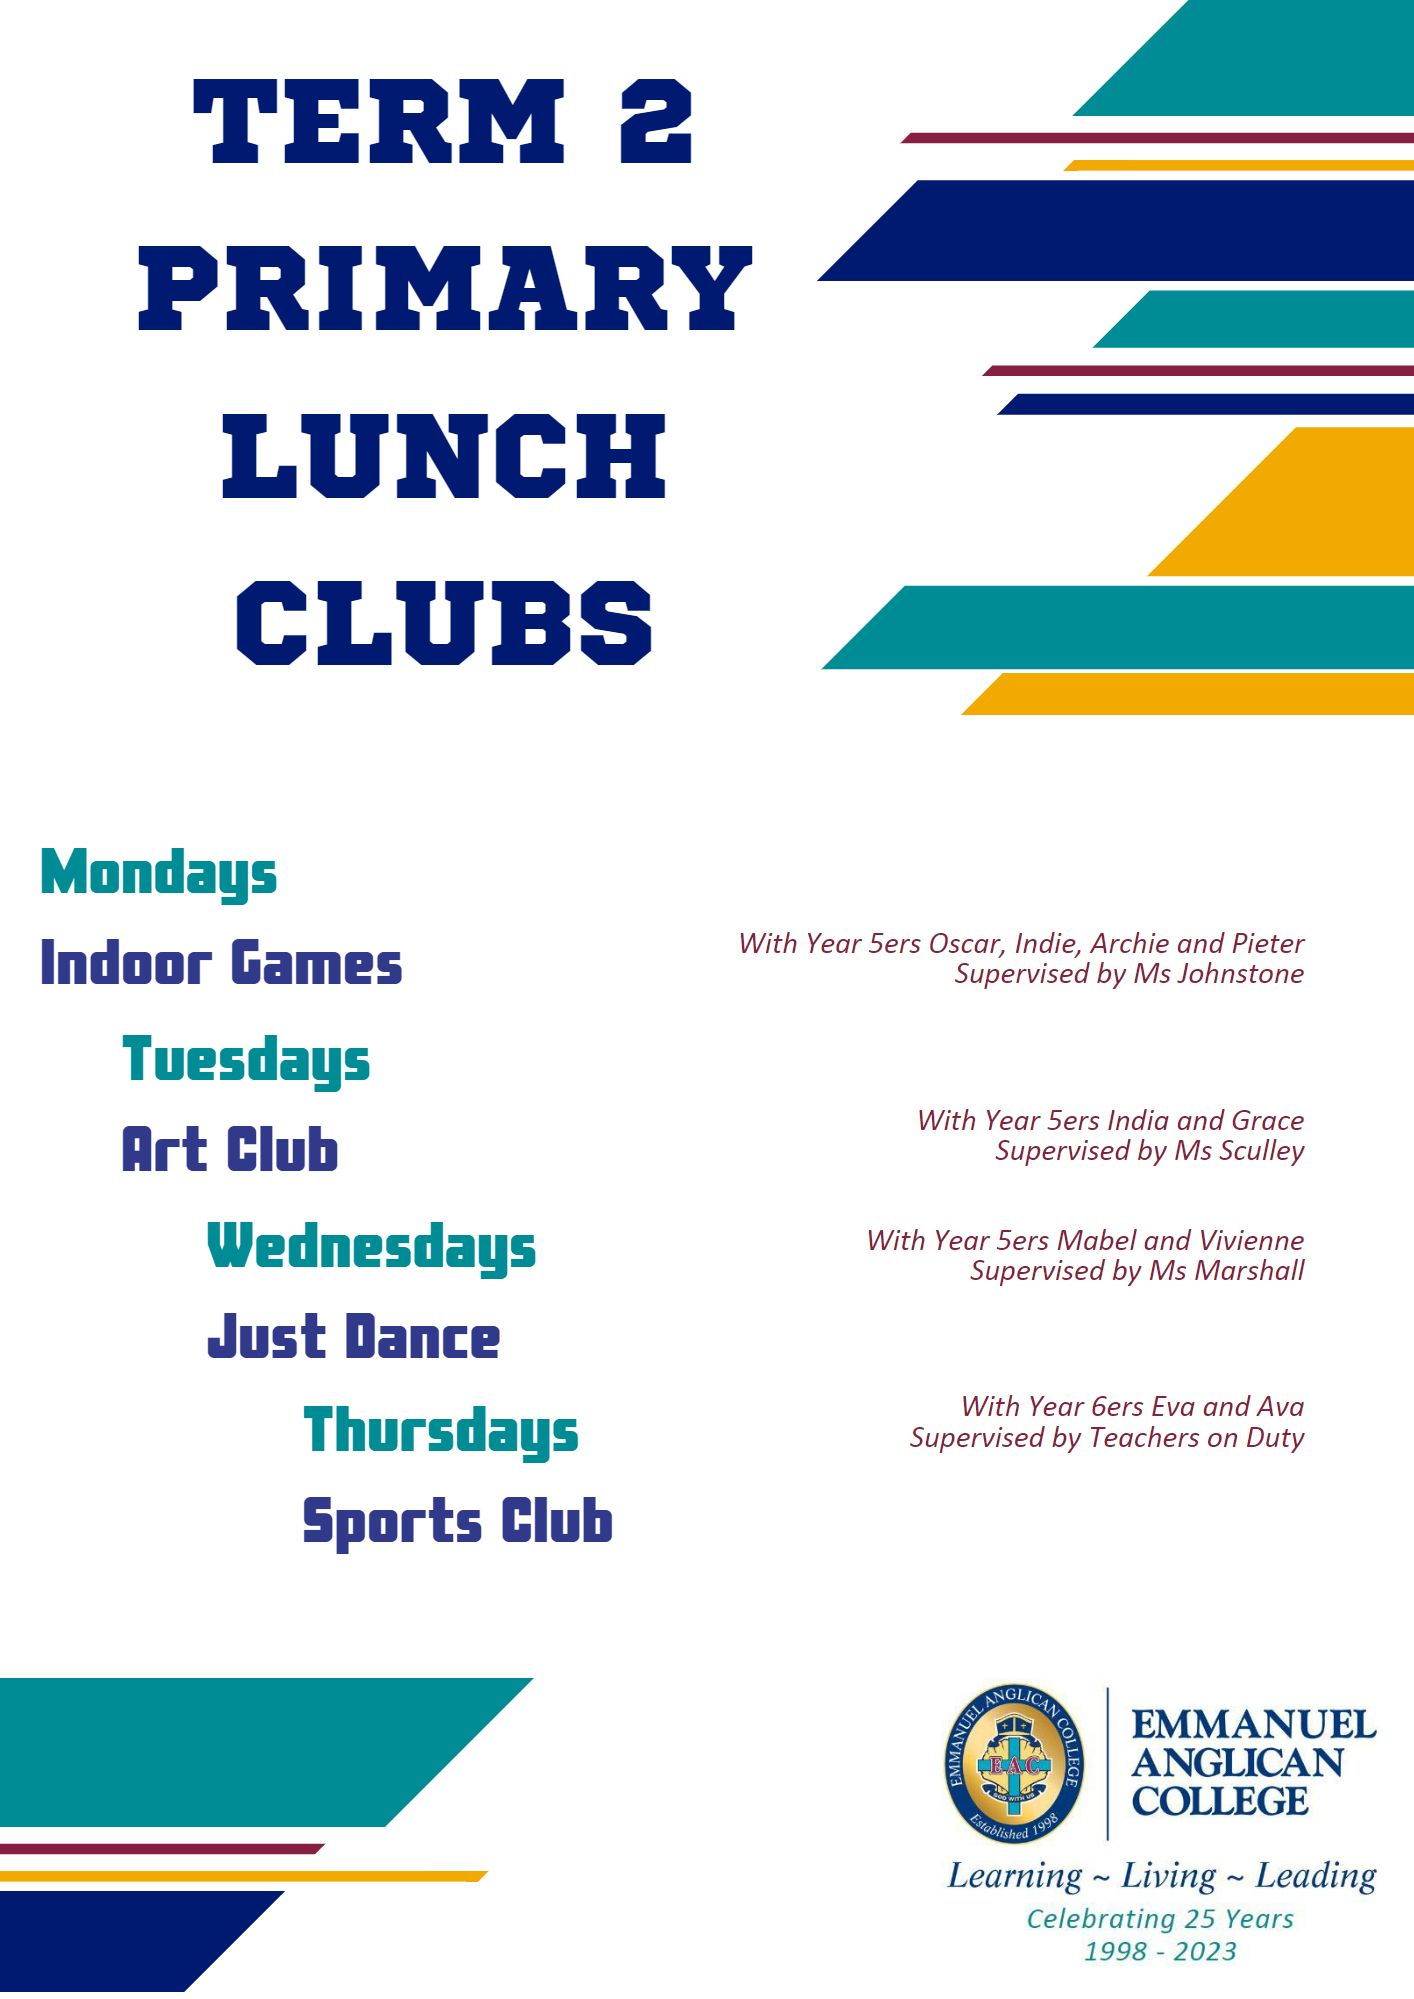 Primary Lunch Clubs